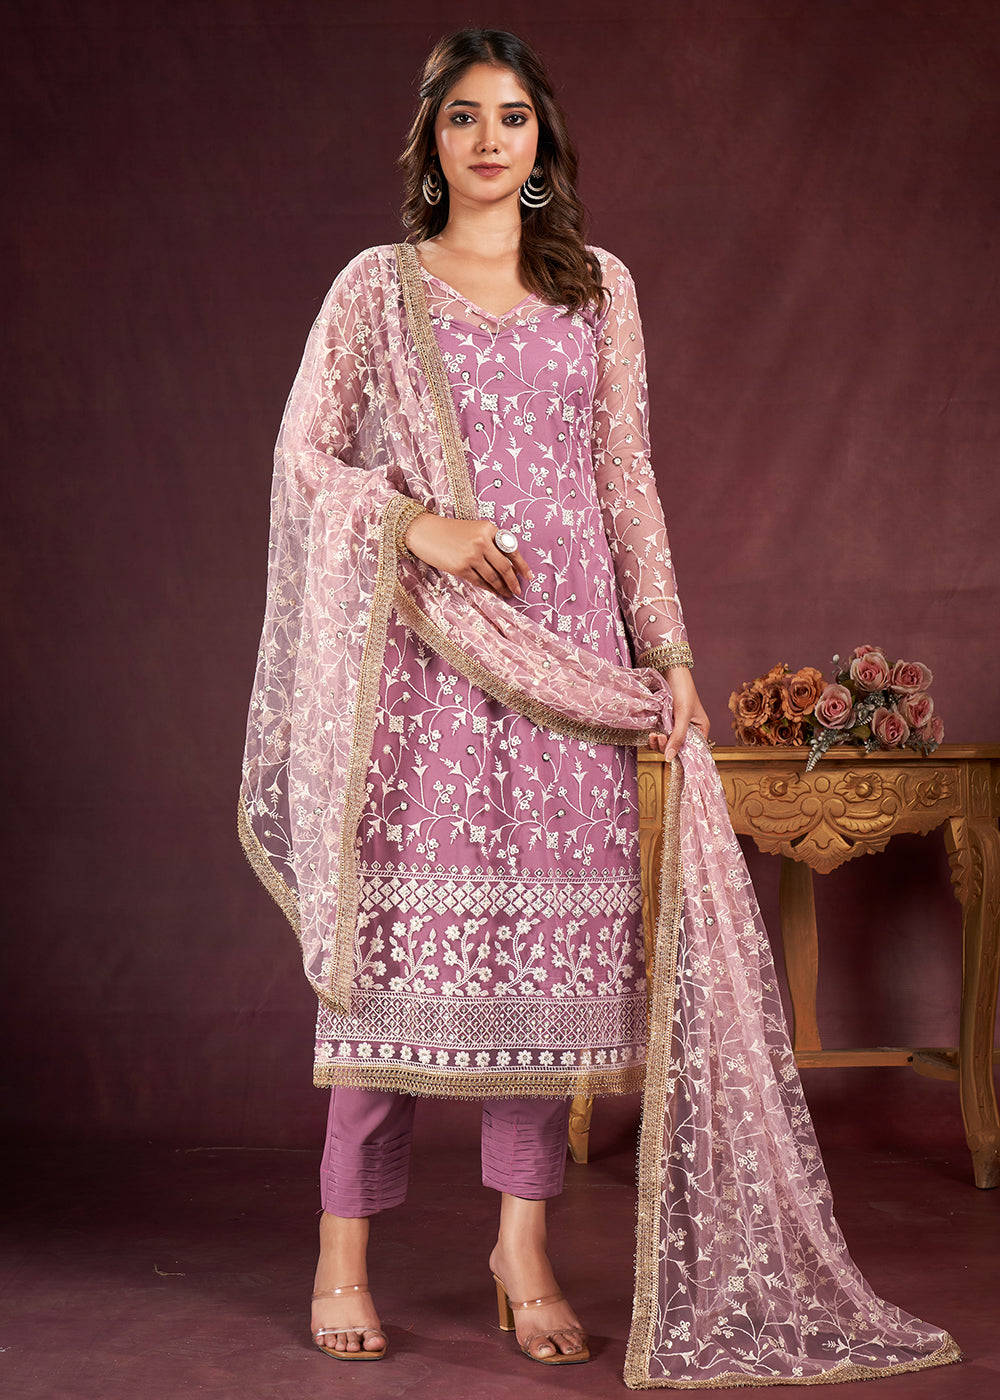 Buy Now Pink Butterfly Net Embroidered Festive Salwar Suit Online in USA, UK, Canada, Germany, Australia & Worldwide at Empress Clothing.